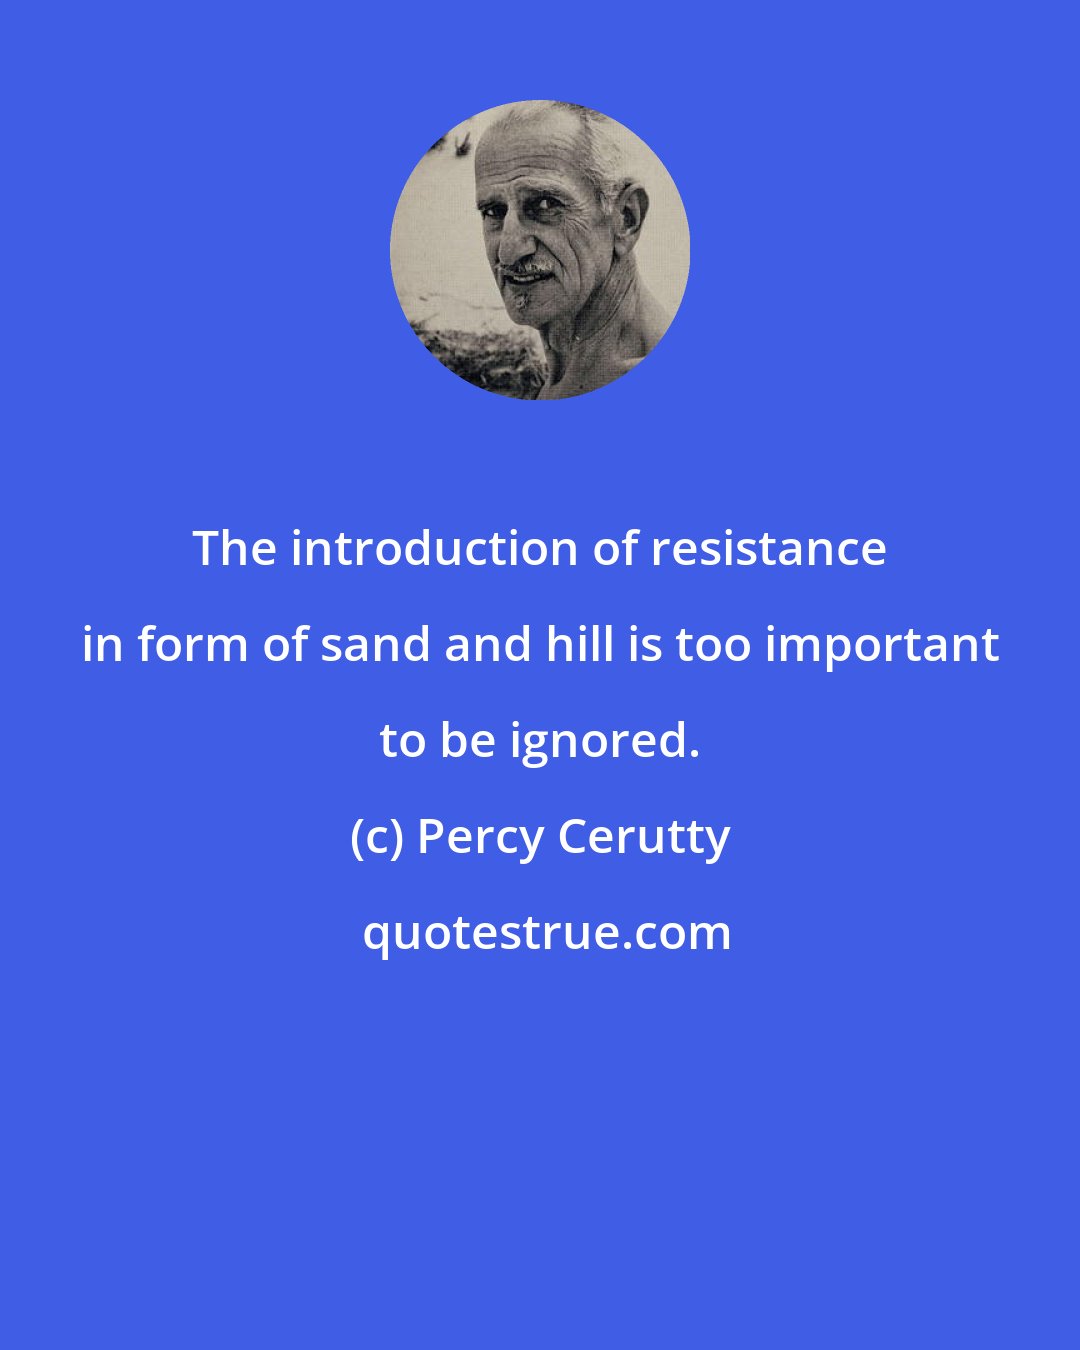 Percy Cerutty: The introduction of resistance in form of sand and hill is too important to be ignored.